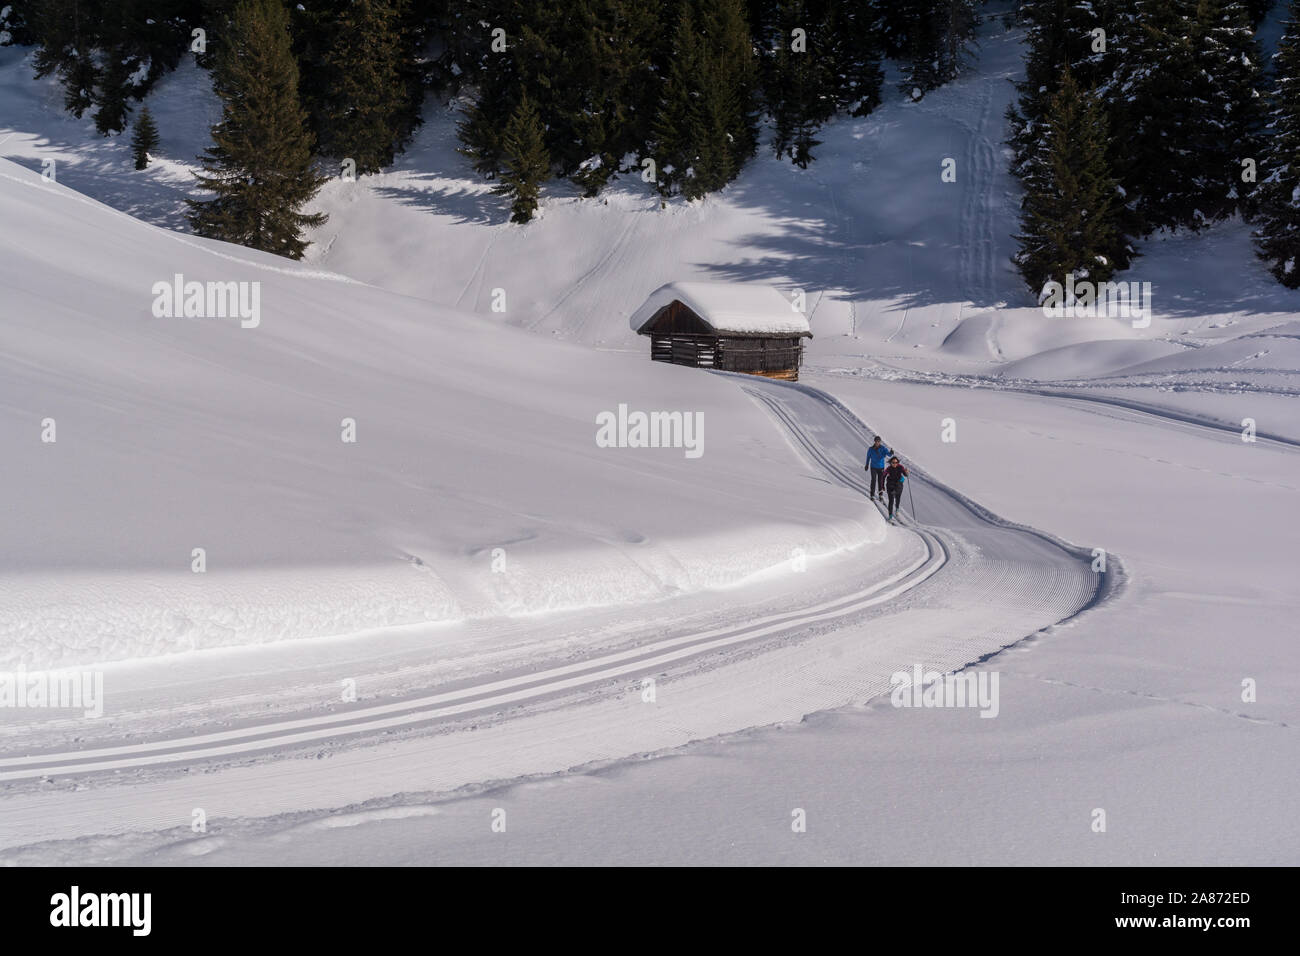 Cross country skiers in Kaunergrat, Kaunertal. Kaunertal valley in Tyrol, in the Austrian Alps. Massive snow falls are covering this area in winter. Stock Photo